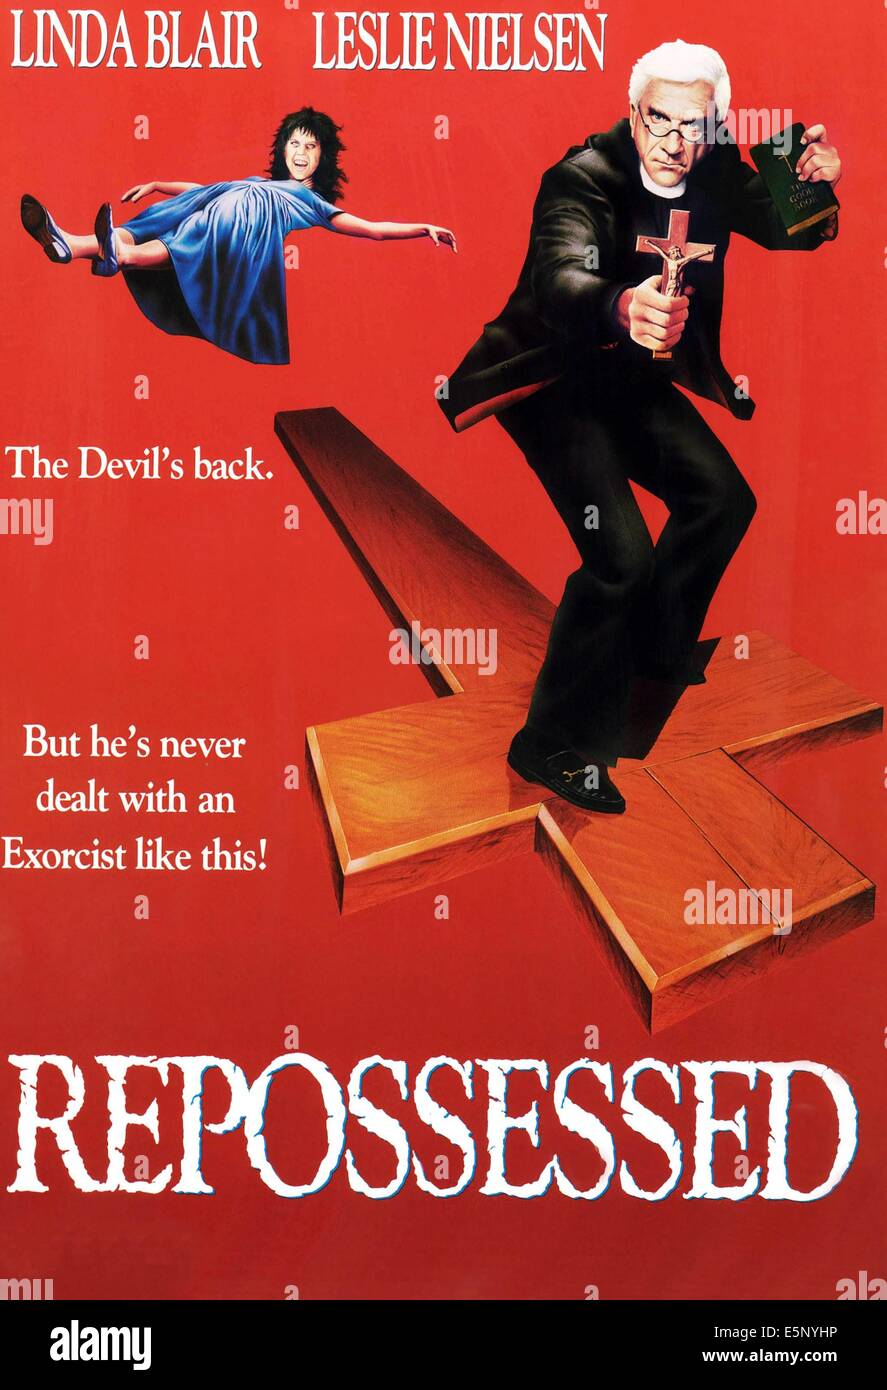 REPOSSESSED, from left: Linda Blair, Leslie Nielsen, 1990, © New Line/courtesy Everett Collection, POSTER REP 001OS, Photo by: Stock Photo